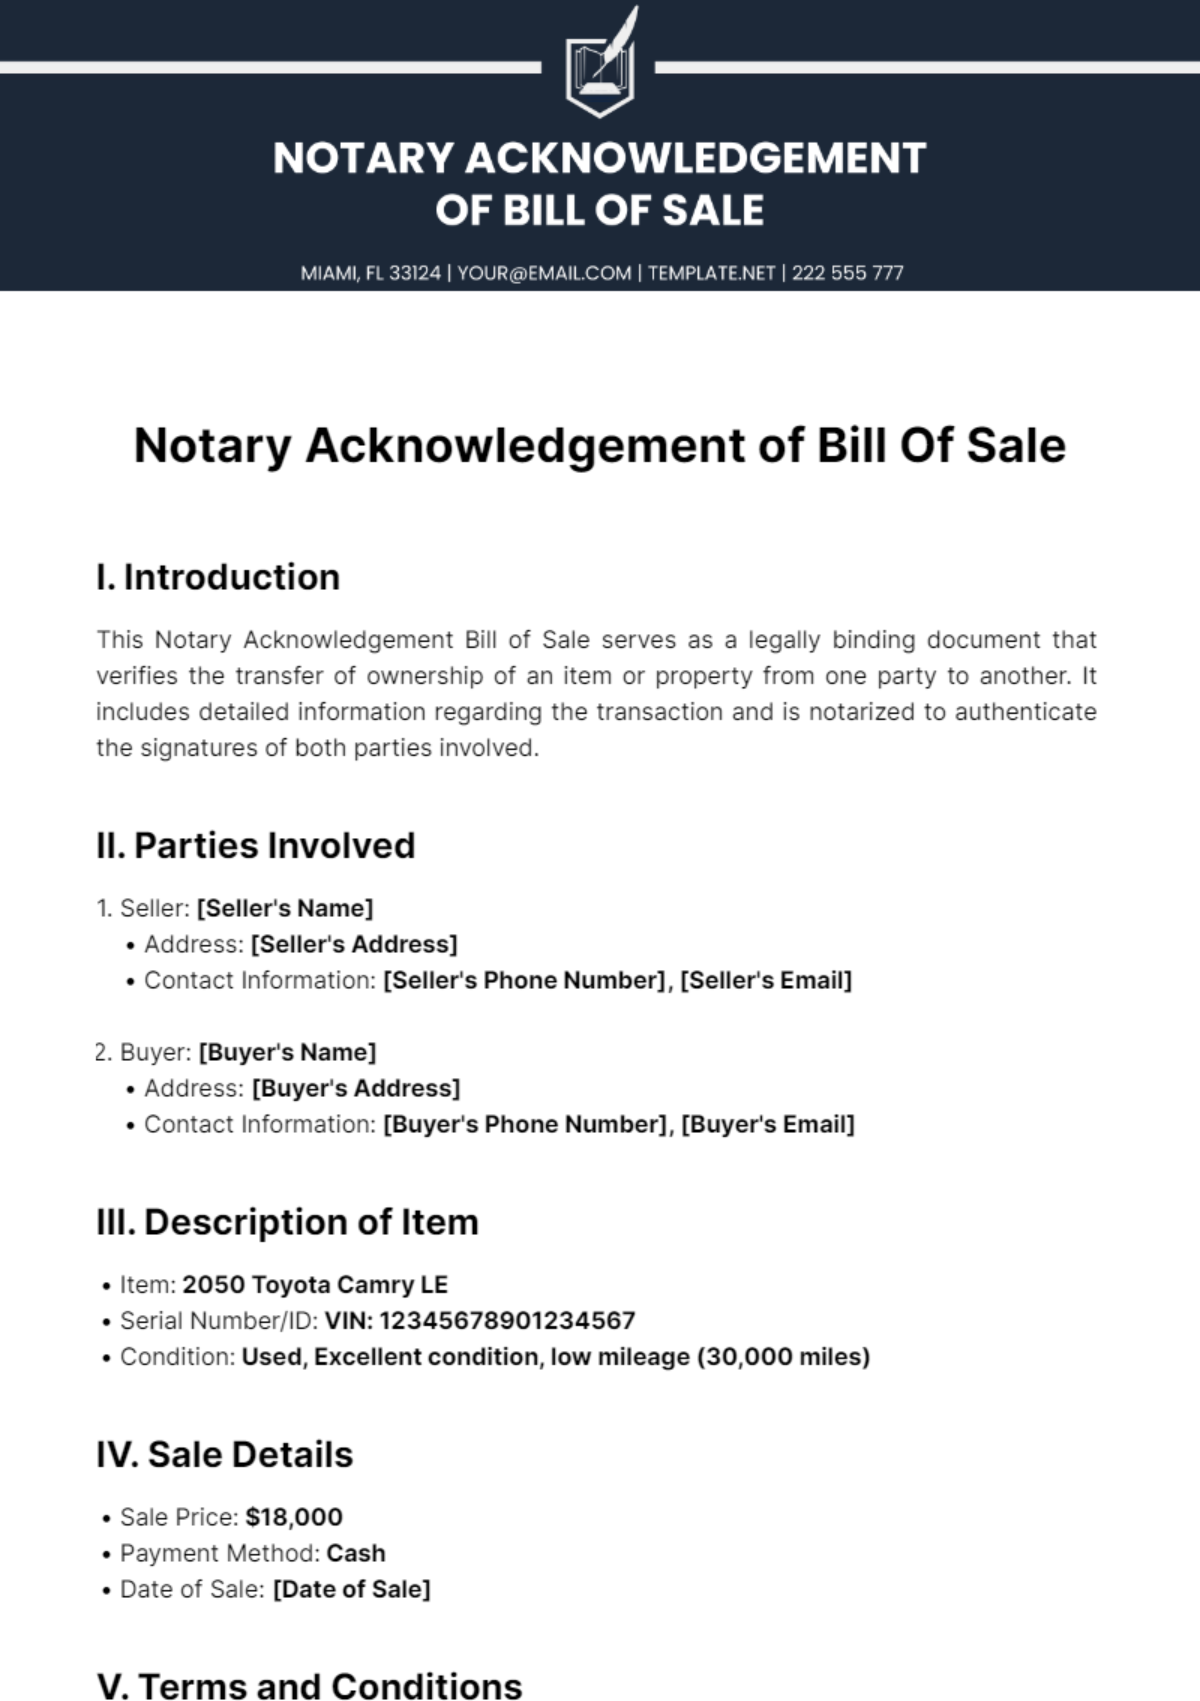 Notary Acknowledgement Bill Of Sale Template